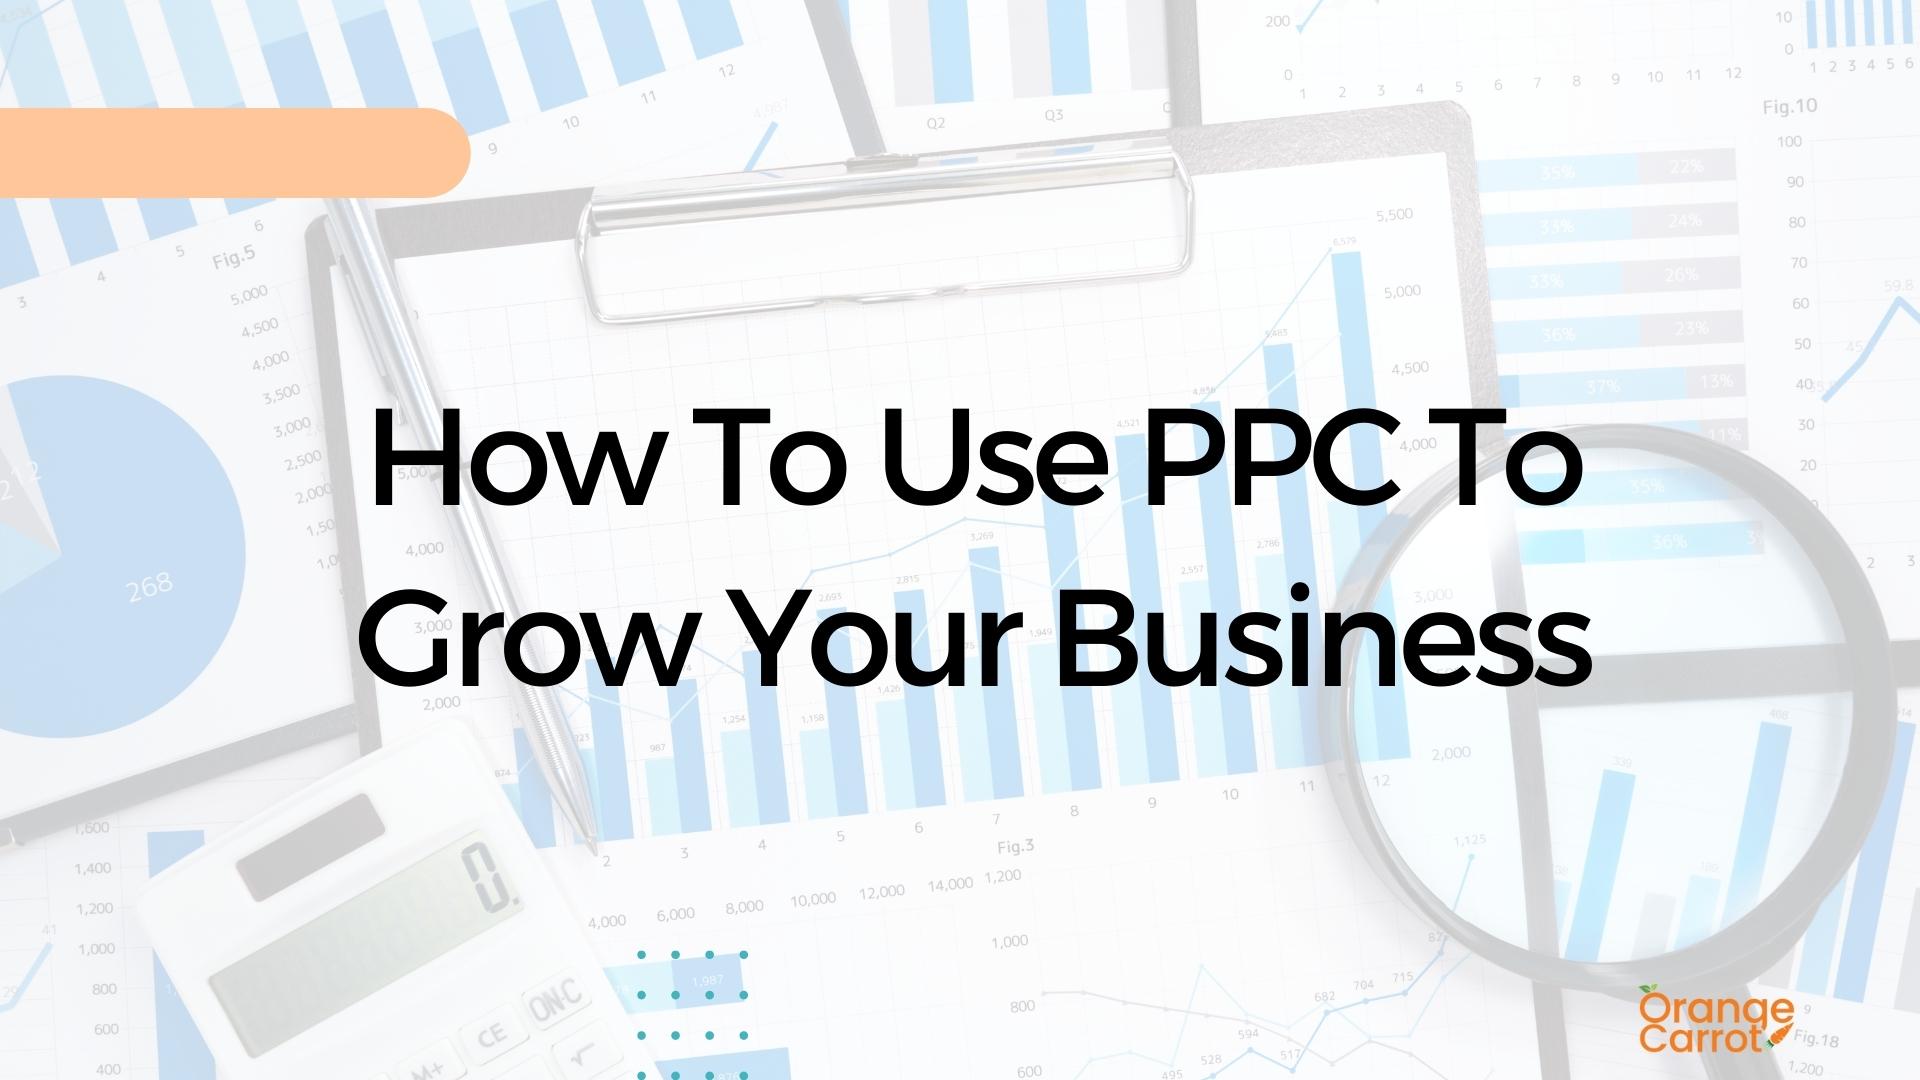 How To Use PPC To Grow Your Business